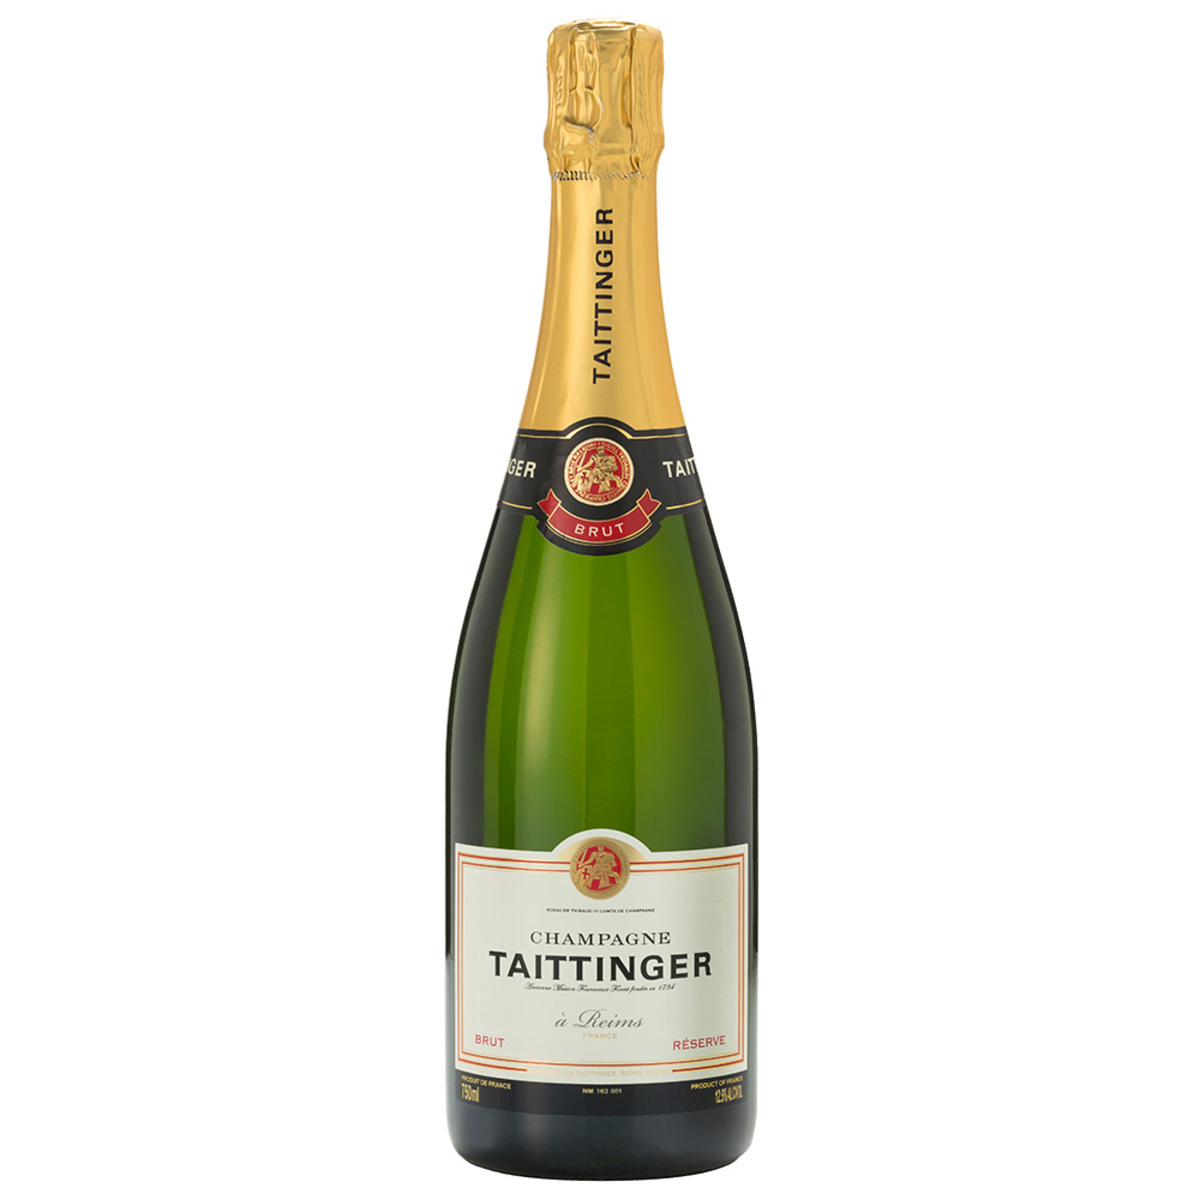 Taittinger Brut Reserve NV Champagne, 6 x 75cl with Gift Boxes 